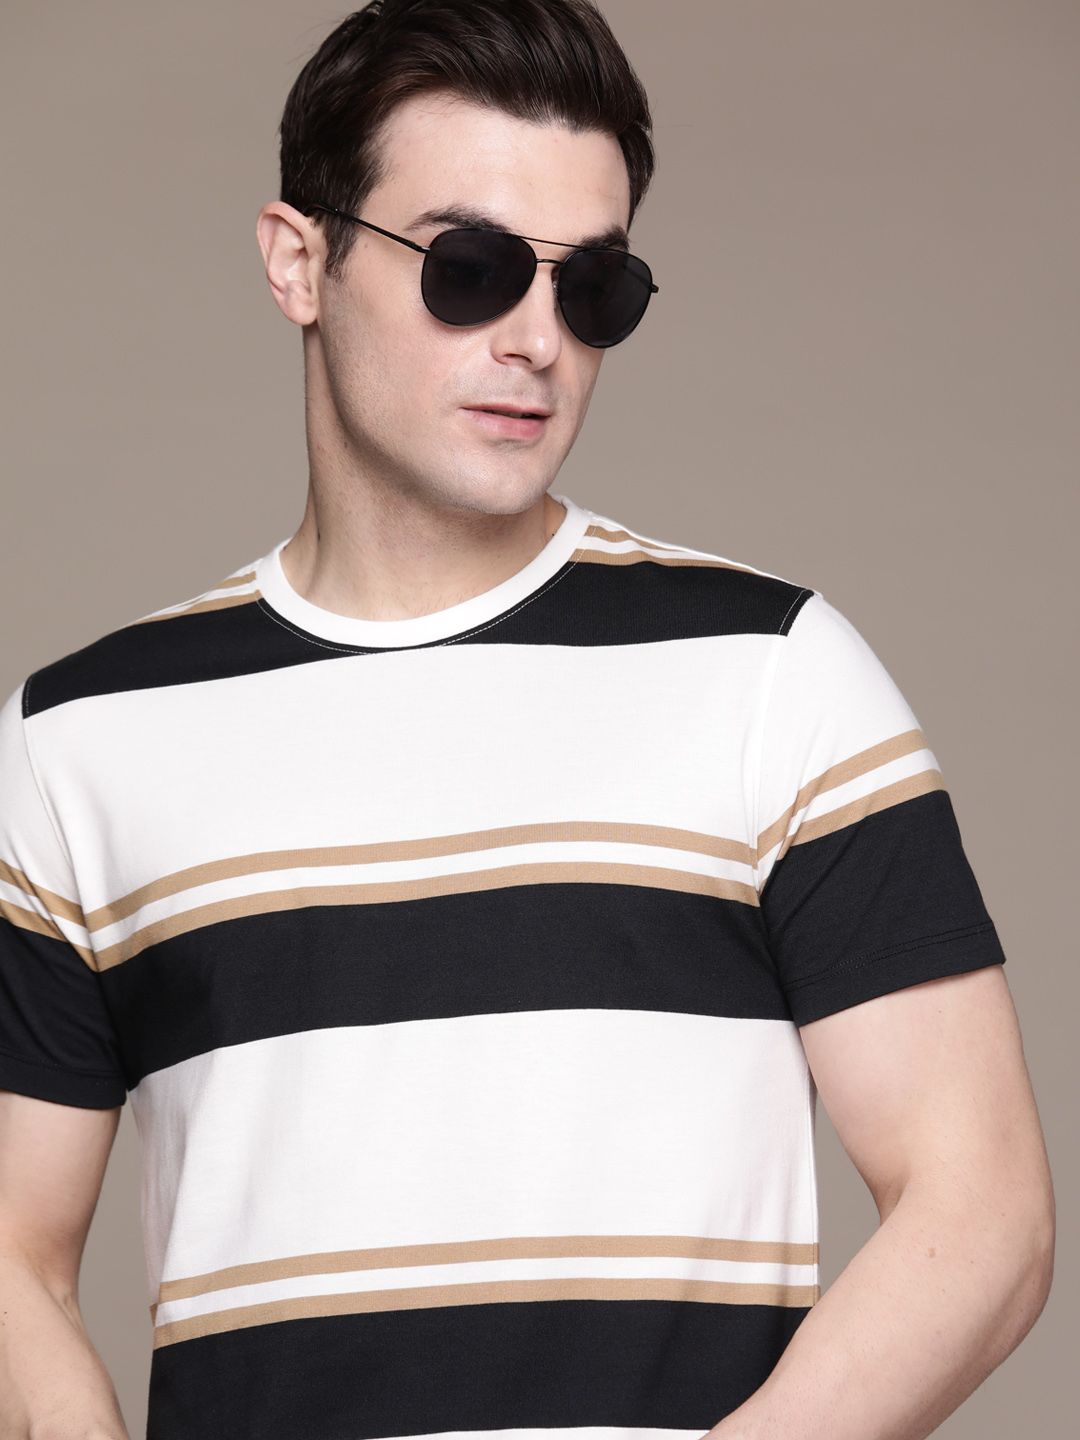 The Roadster Lifestyle Co. Striped T-shirt